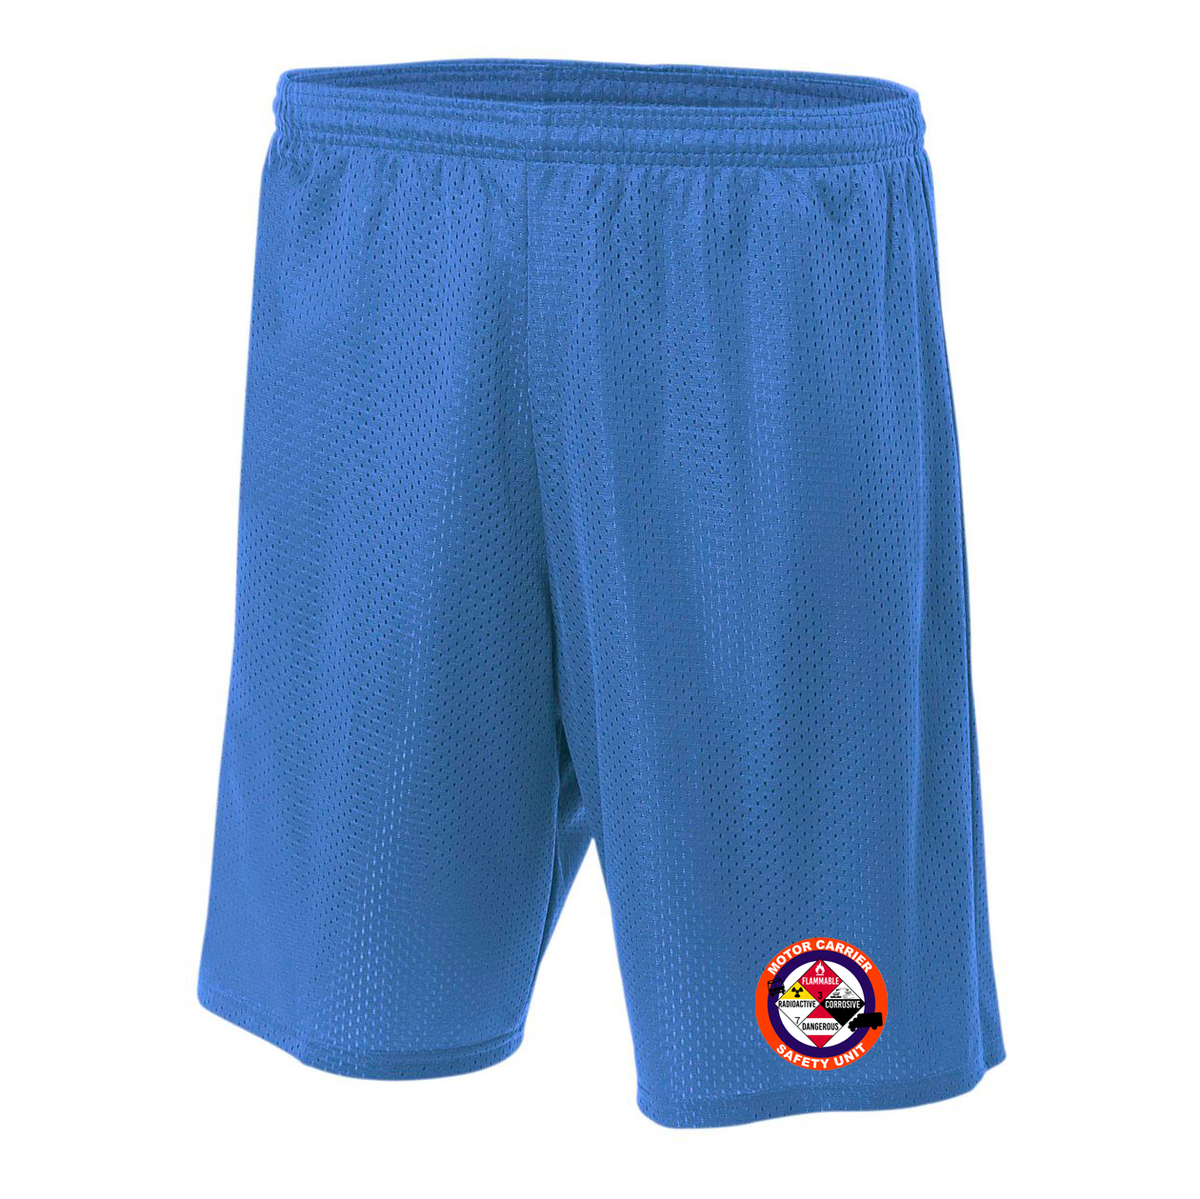 NCPD Motor Carrier Unit 7" Lined Tricot Mesh Shorts